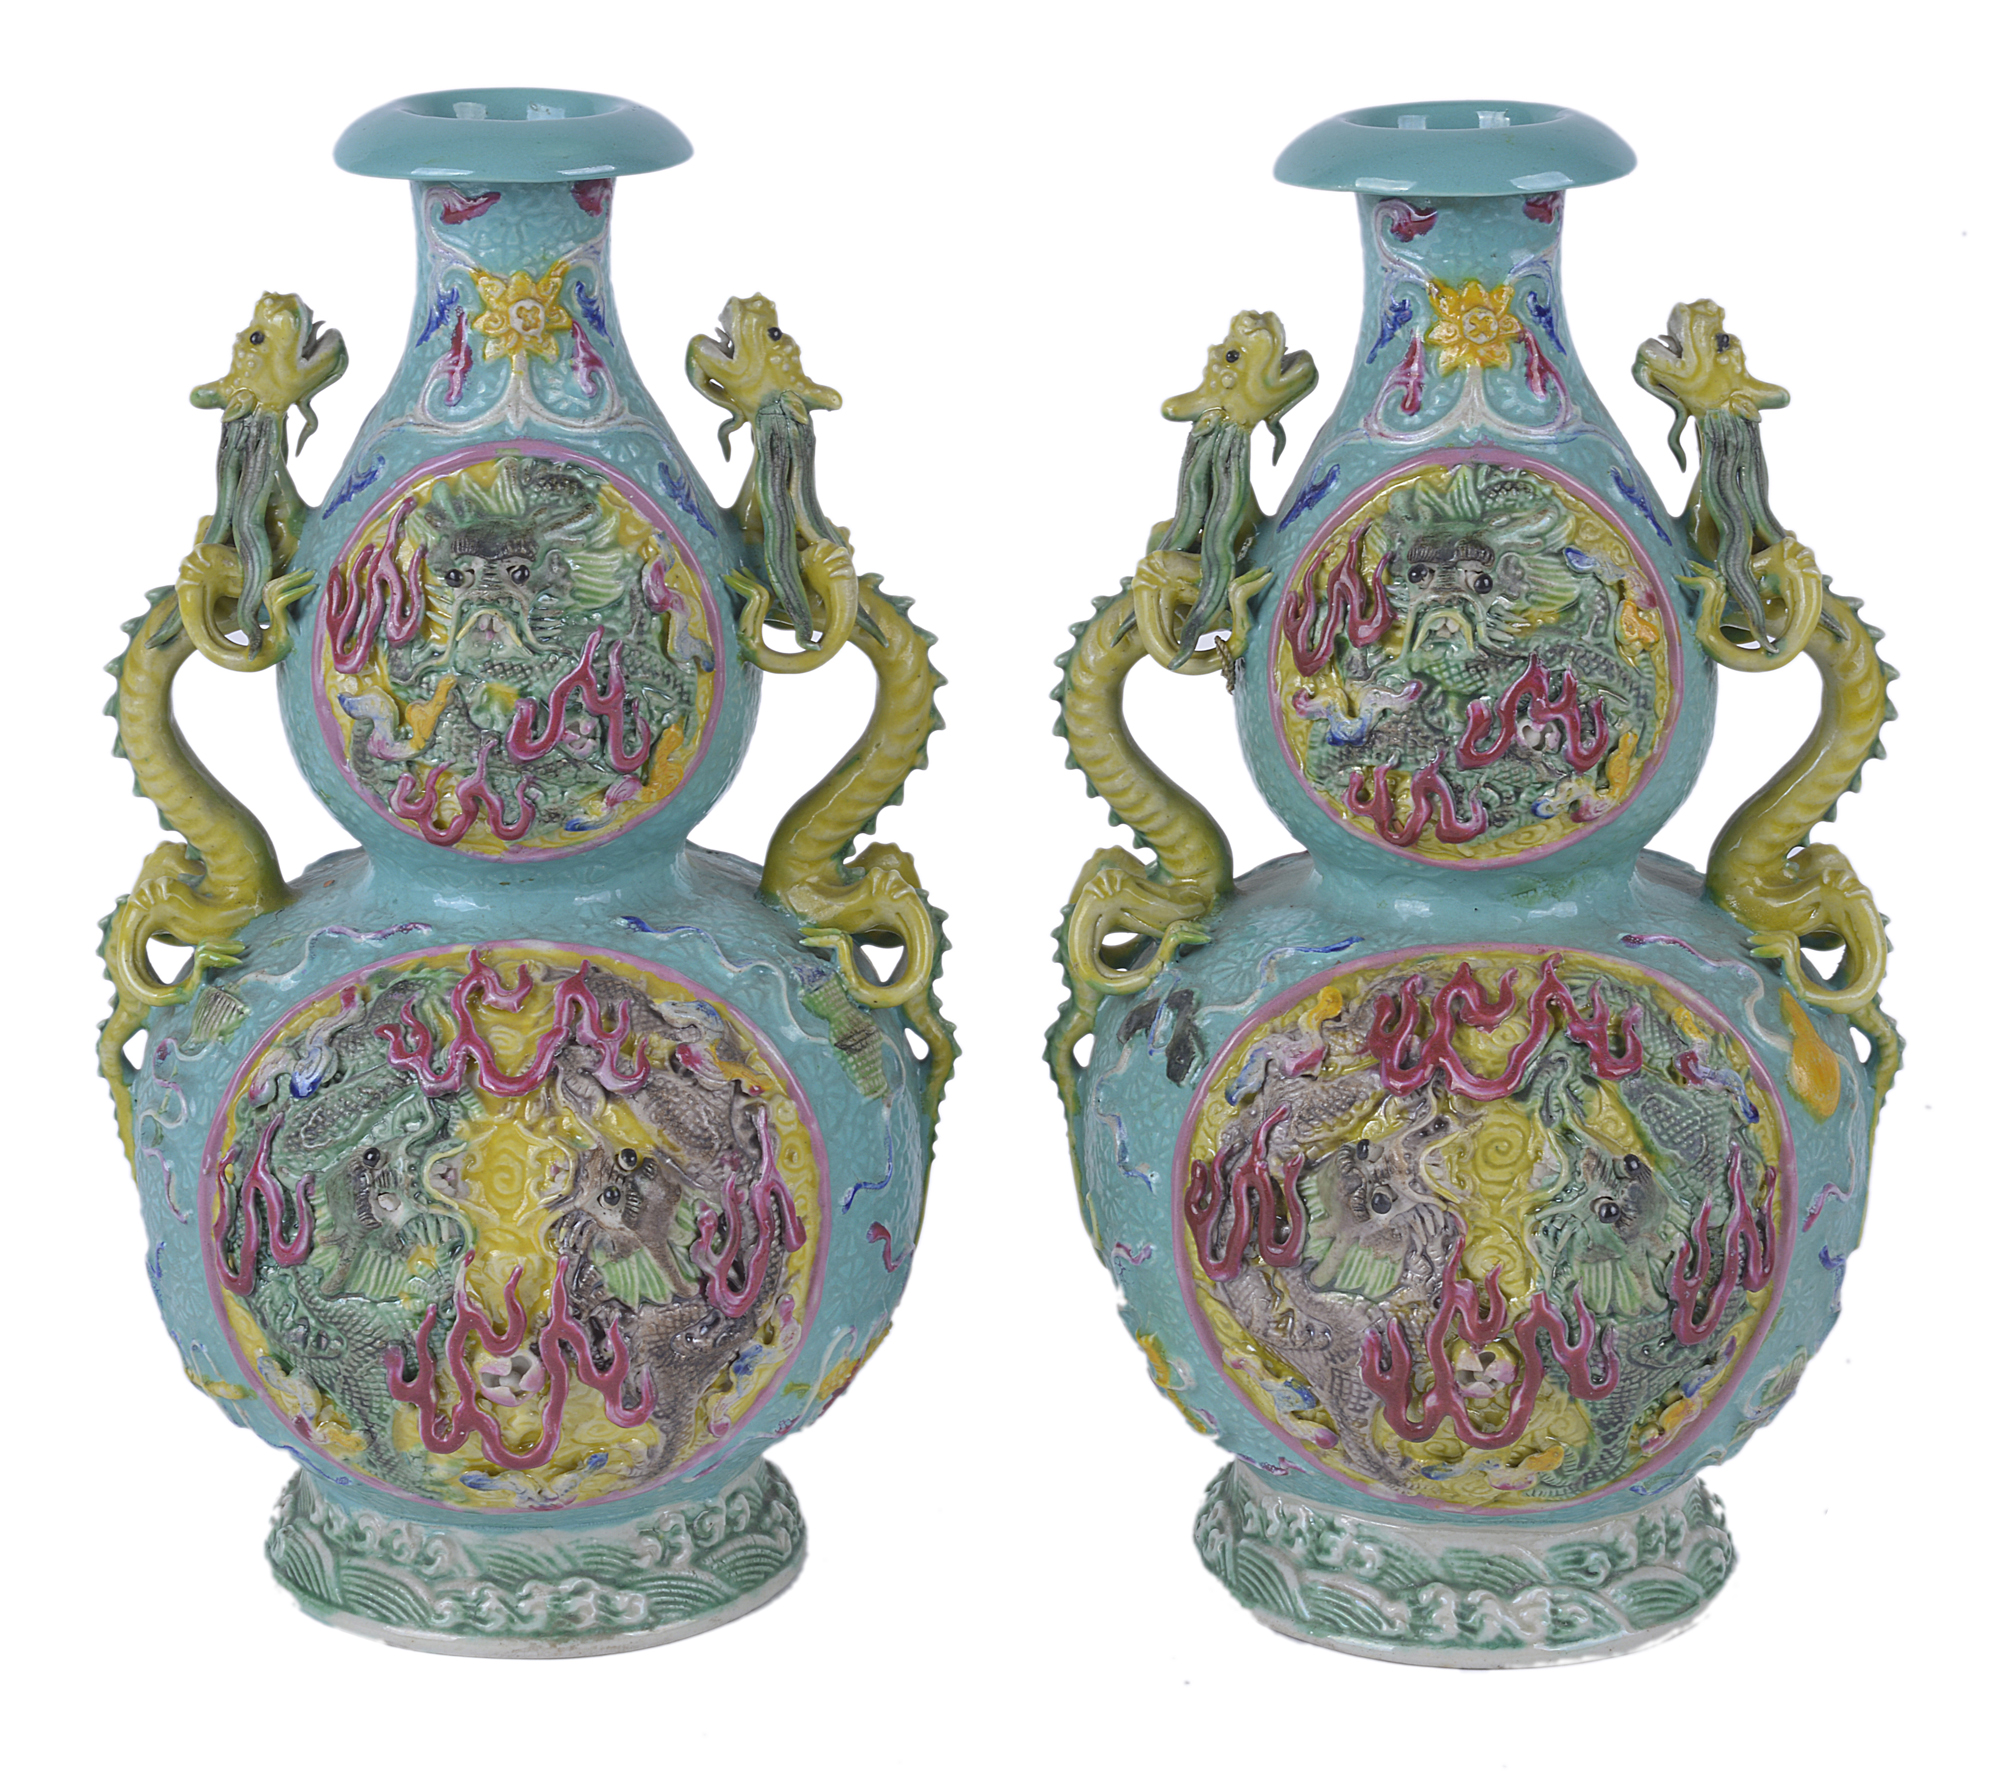 A pair of 19th Century Chinese porcelain vases, with turquoise ground and dragon handles, with